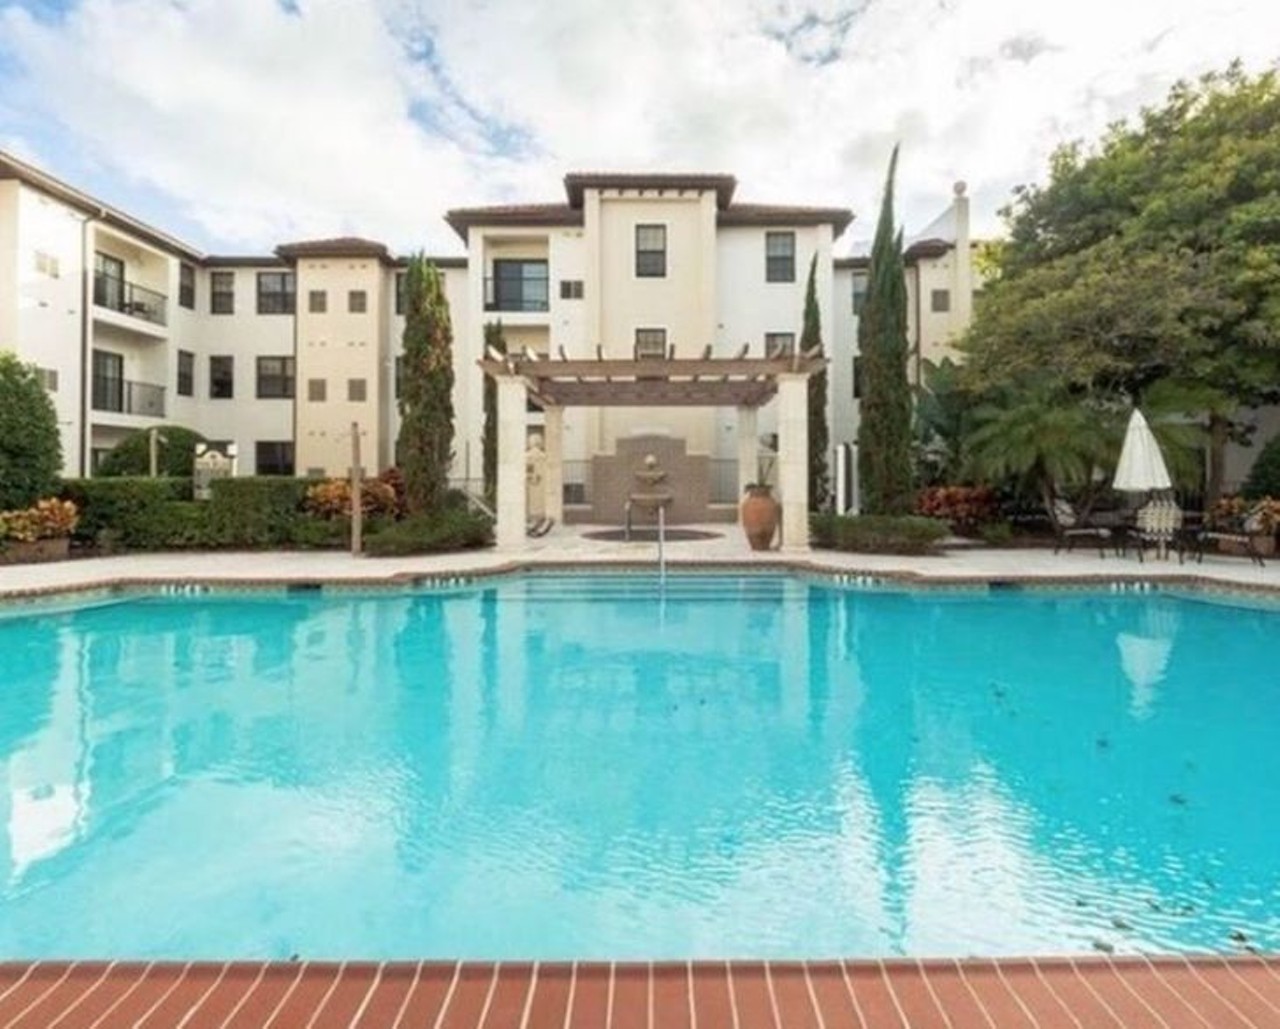 9910 Turf Way, Orlando
$1,225/mo
2 bed, 2 bath, 905 sqft
This apartment in Hawthorne Village has been updated as well as the rest of the facility. There are two pools, a playground, business centers, tennis courts and much more.